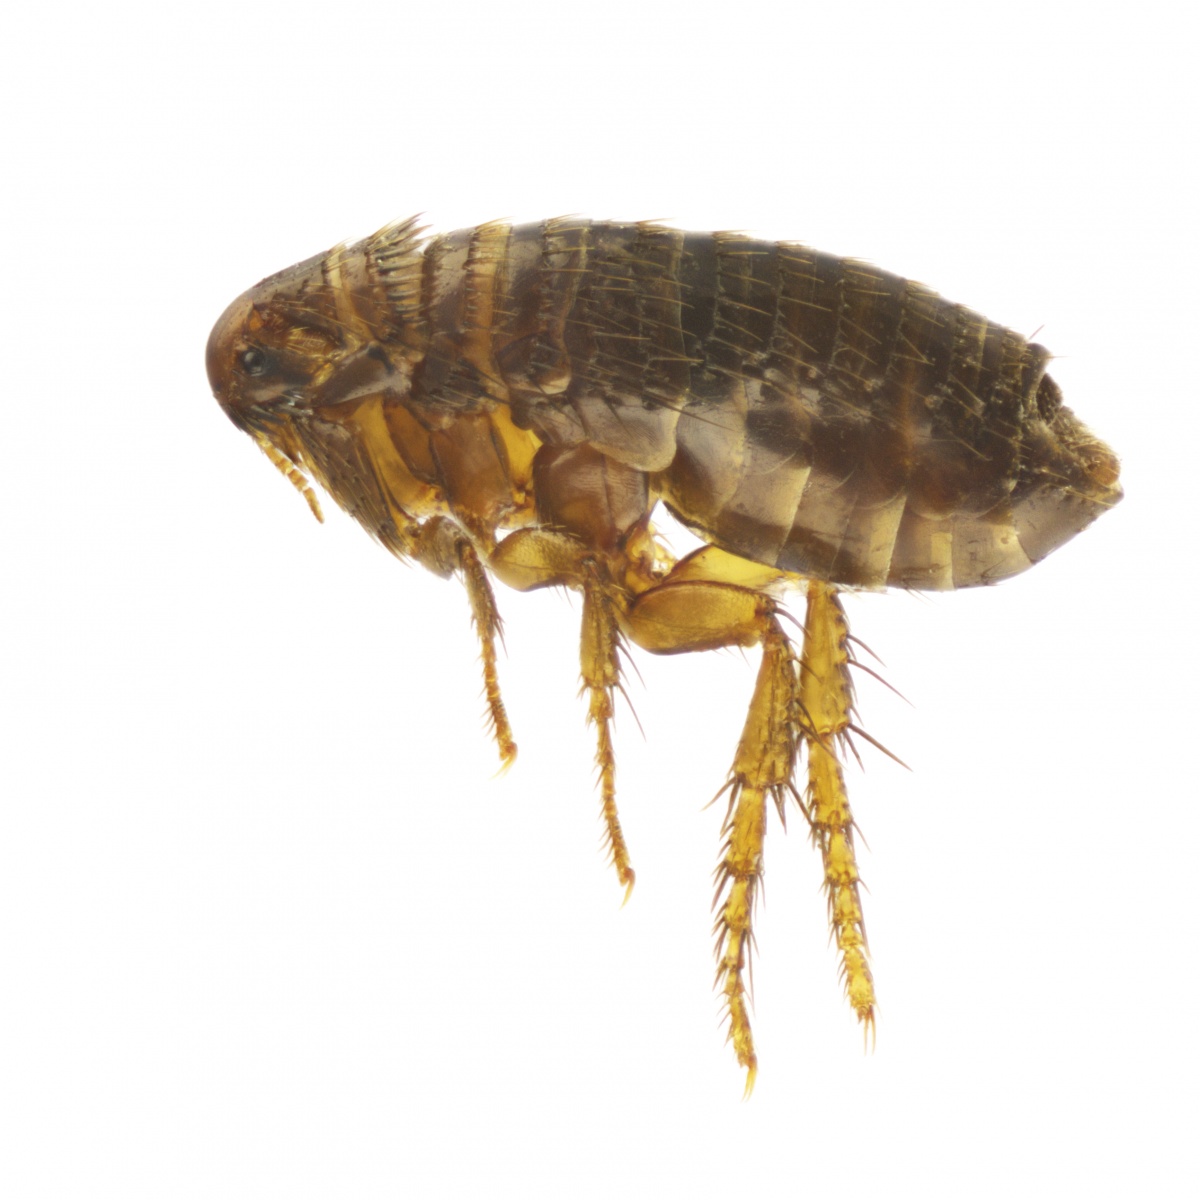 Bed Bugs - Initial Symptoms and Signs - eMedicineHealth